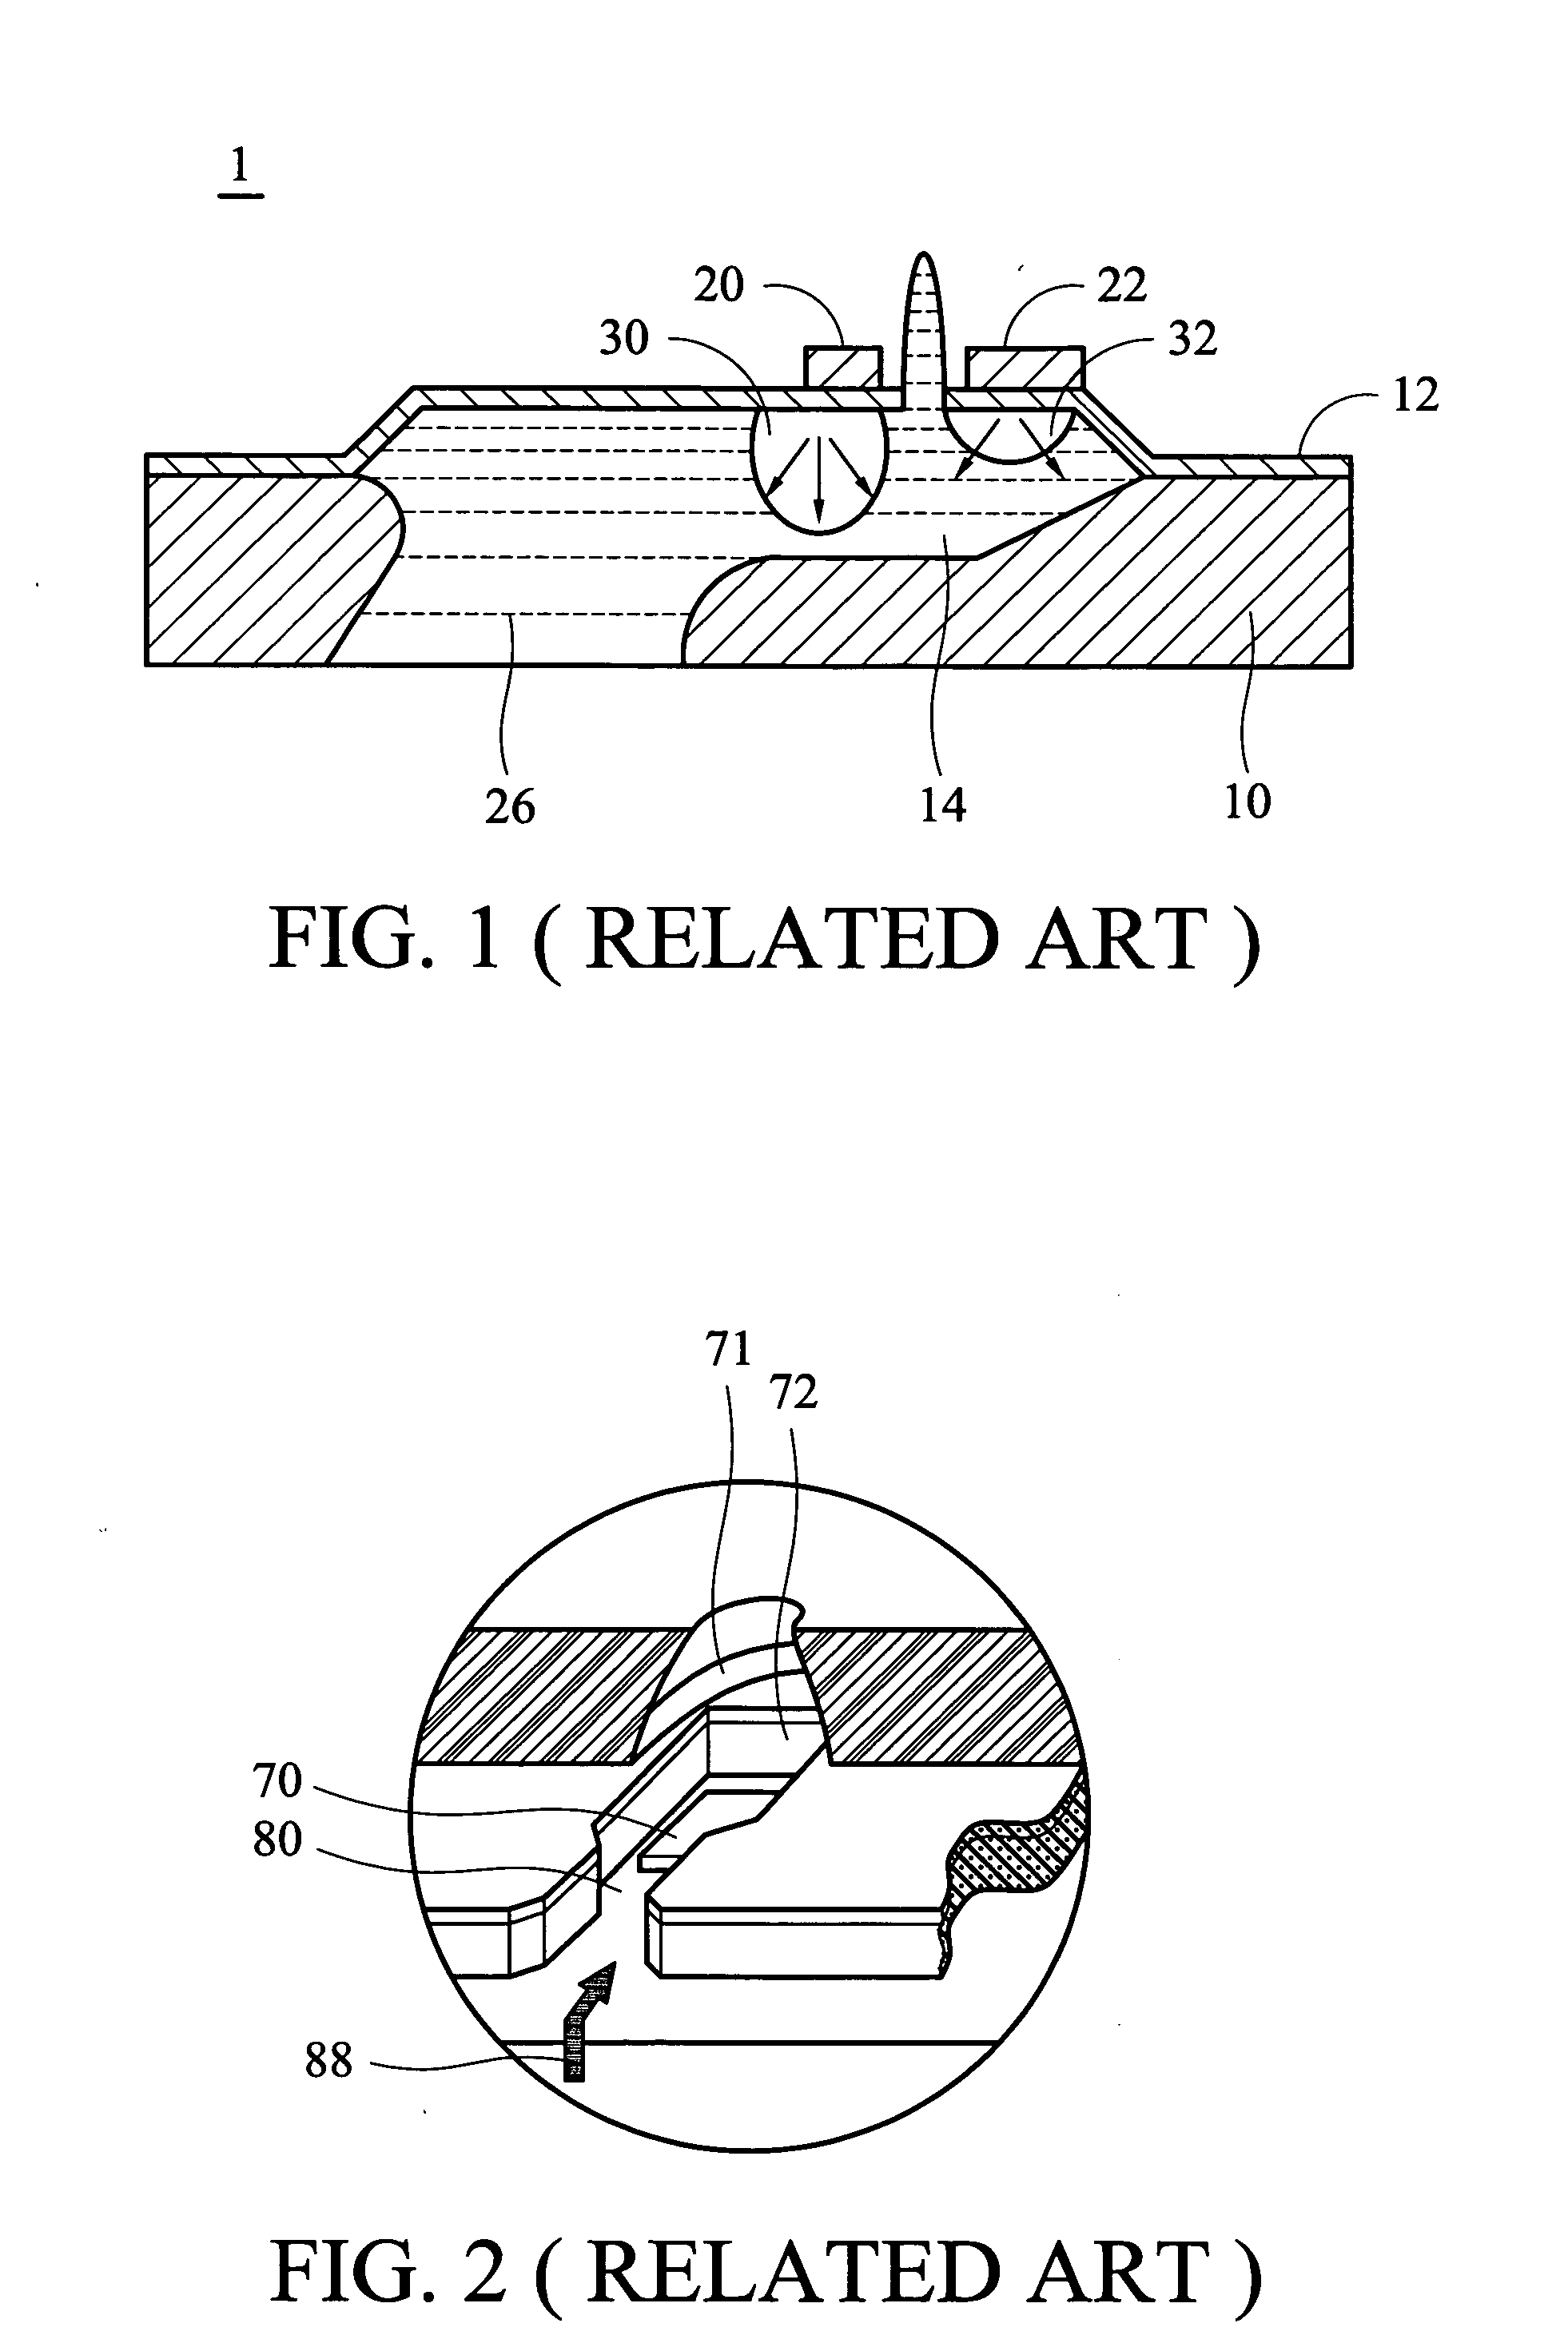 Method for fabricating an enlarged fluid chamber